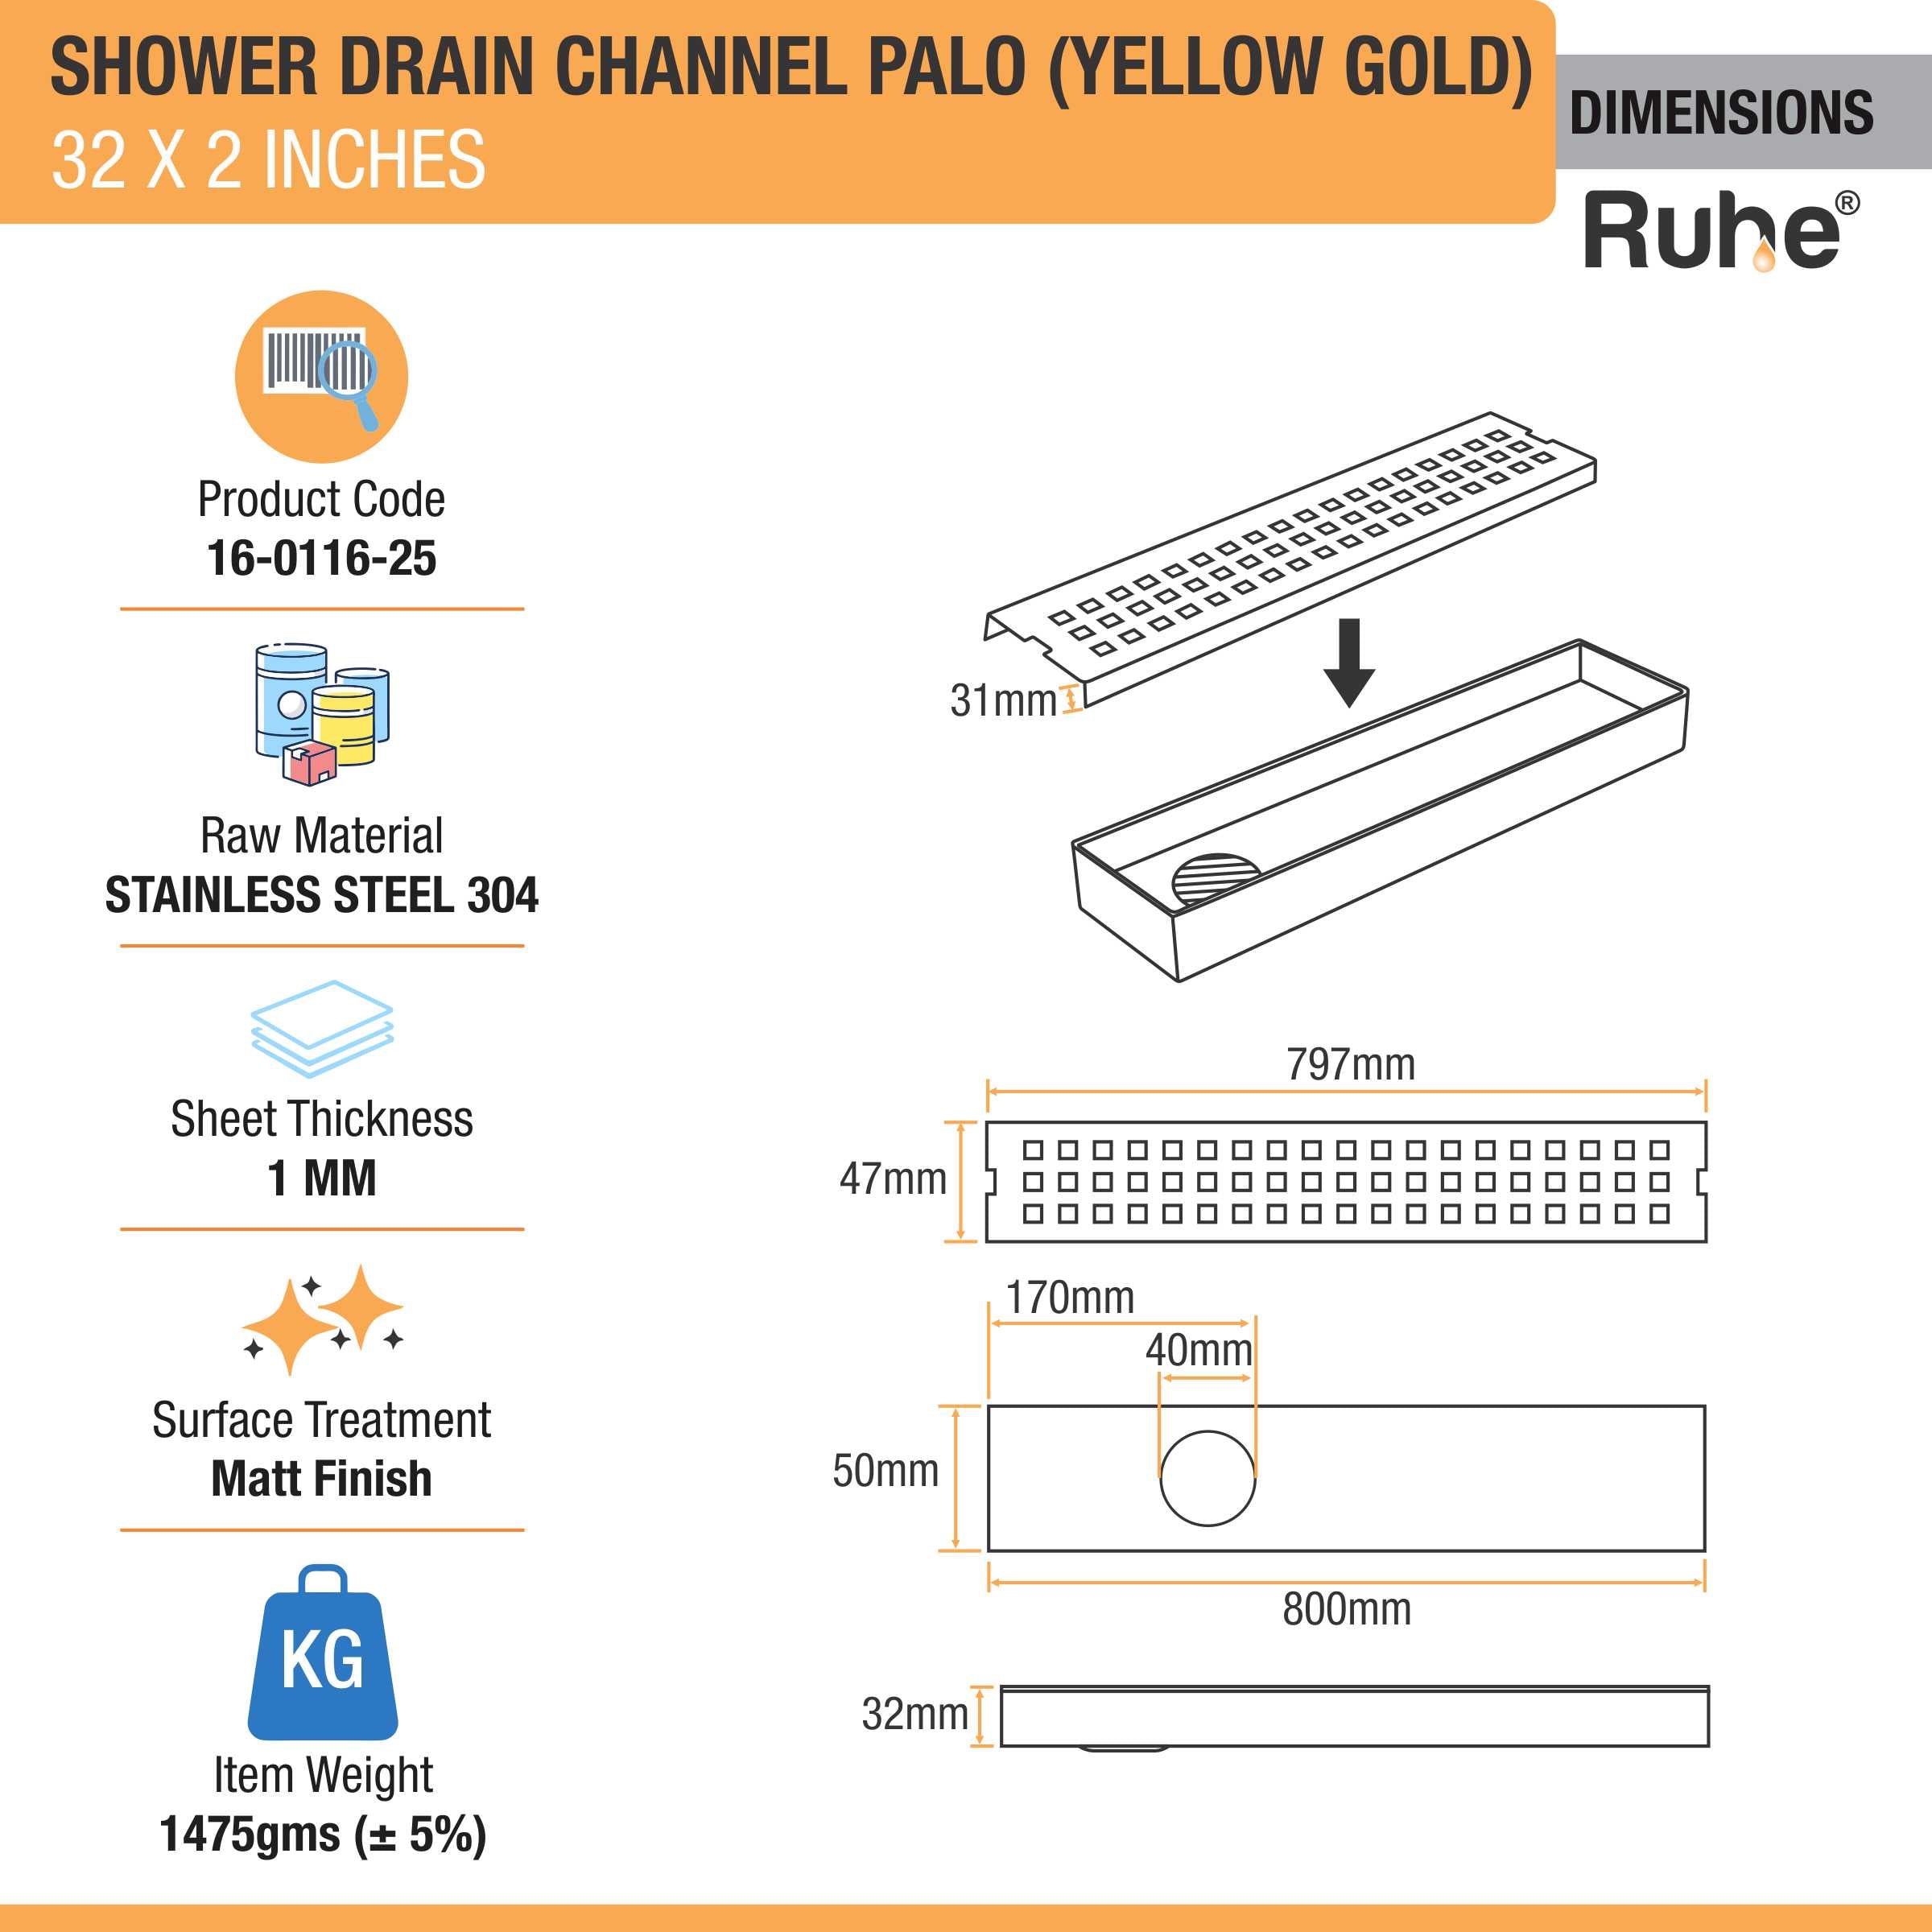 Palo Shower Drain Channel (32 x 2 Inches) YELLOW GOLD dimensions and size